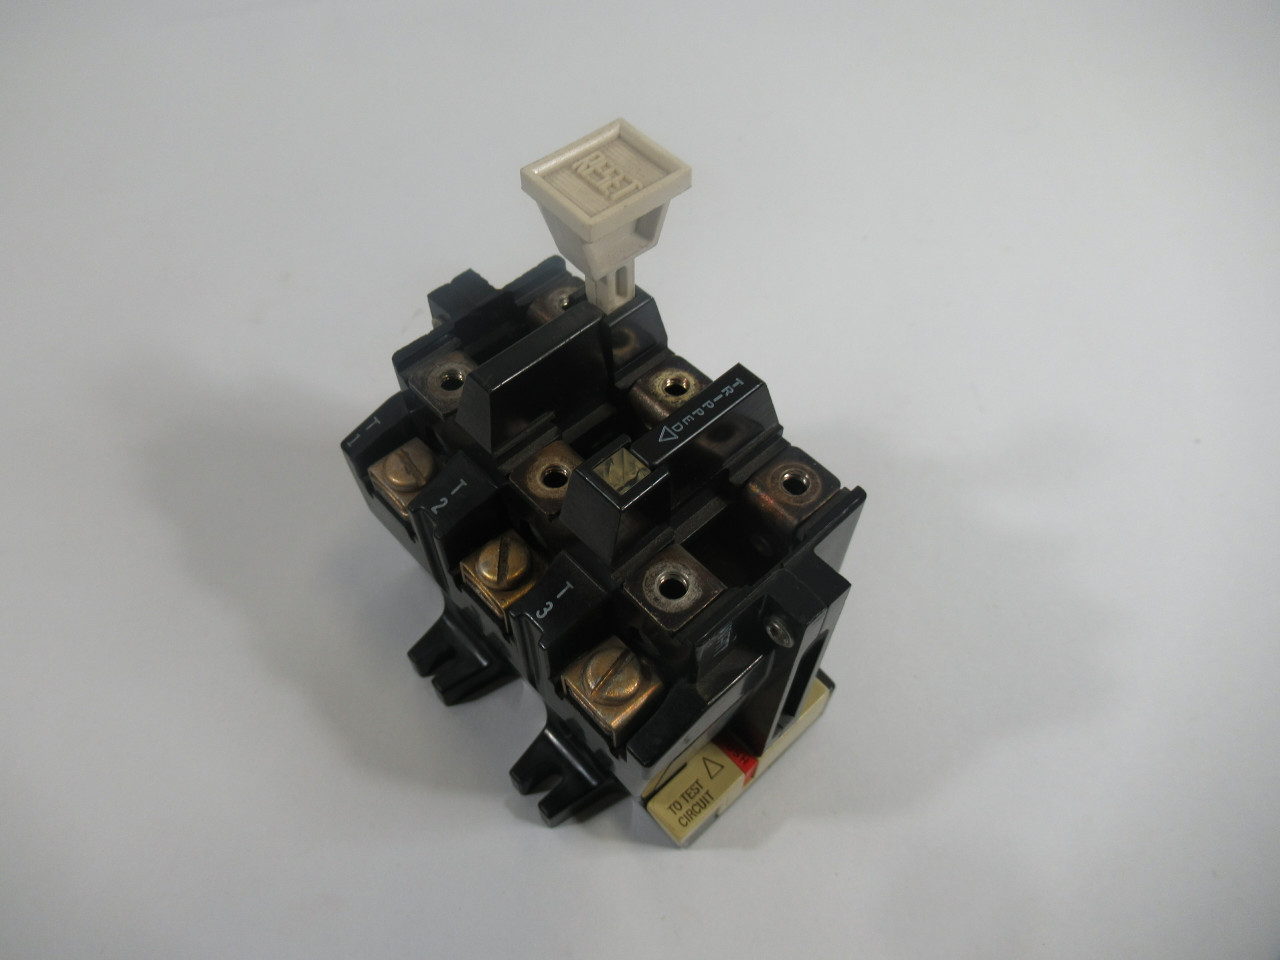 Allen-Bradley 592-BOW16 Overload Relay Series A USED